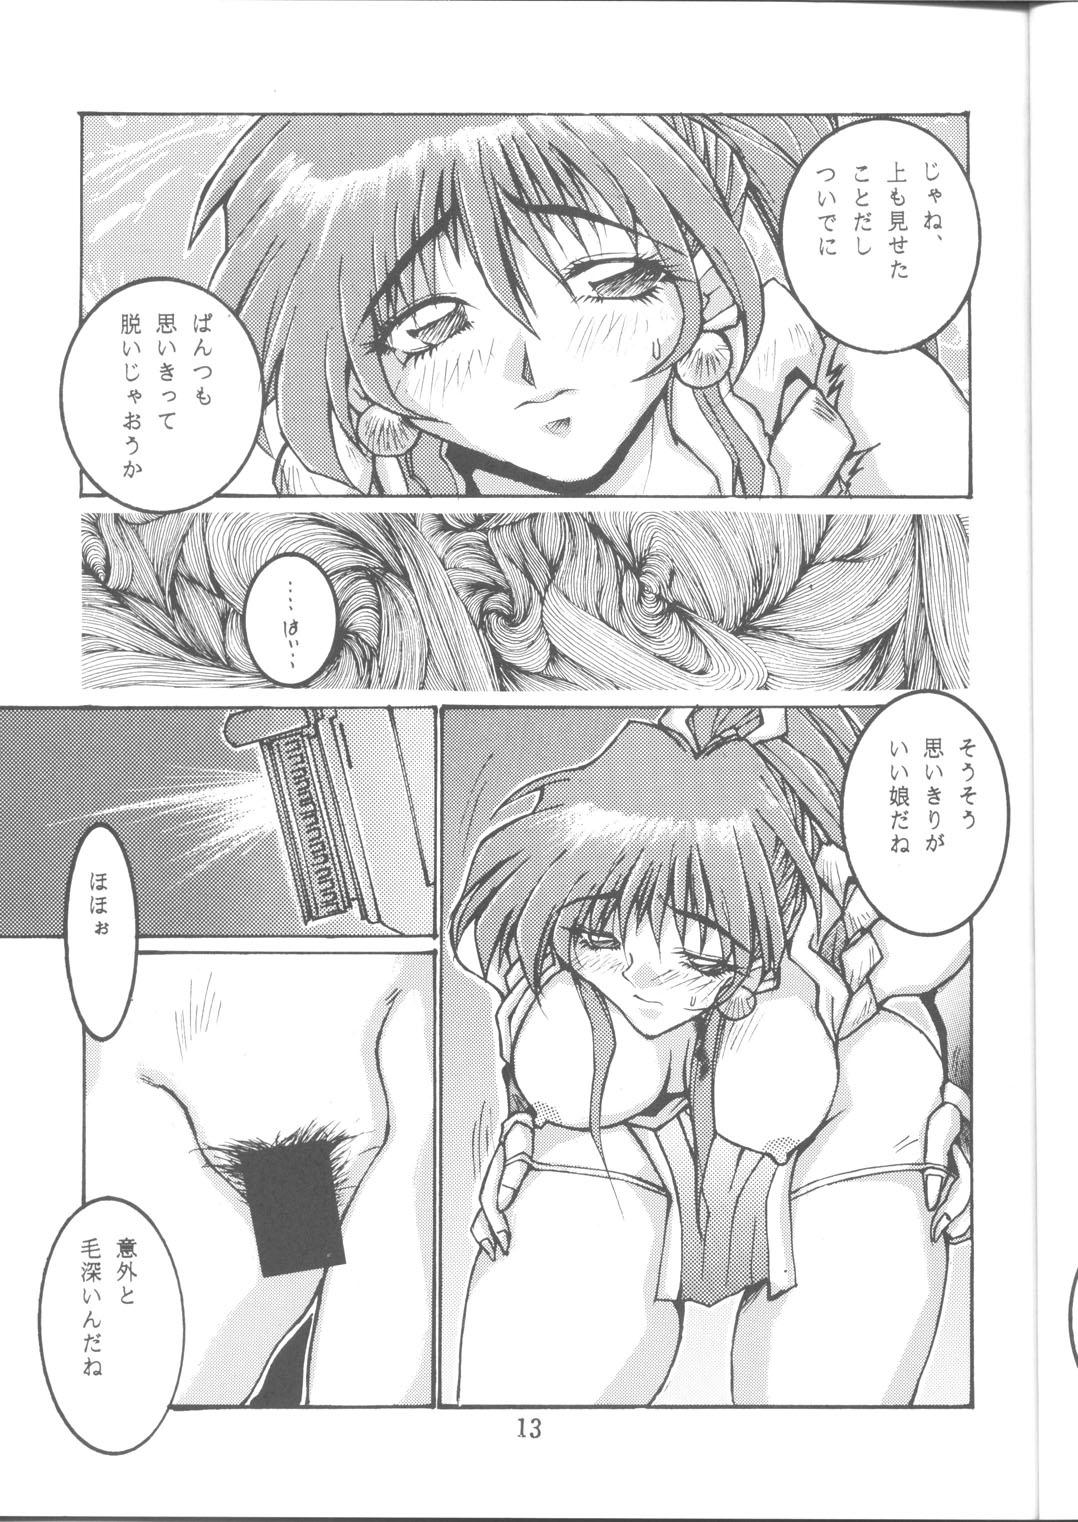 Topless Queen Ninja 2 - King of fighters Girl Fuck - Page 12